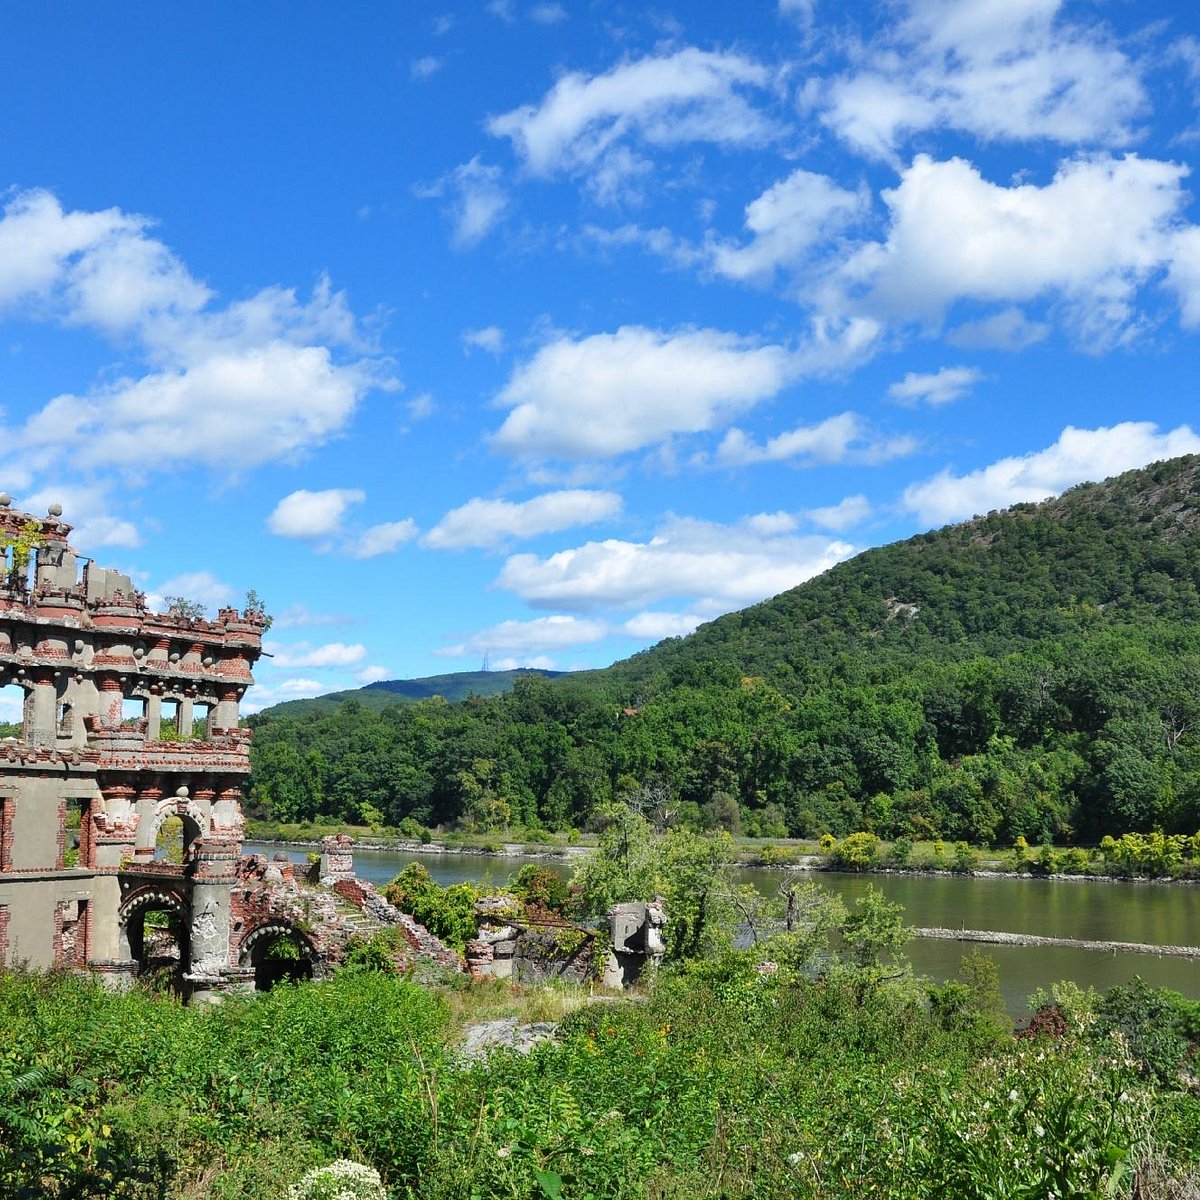 bannerman castle cruise and walking tour